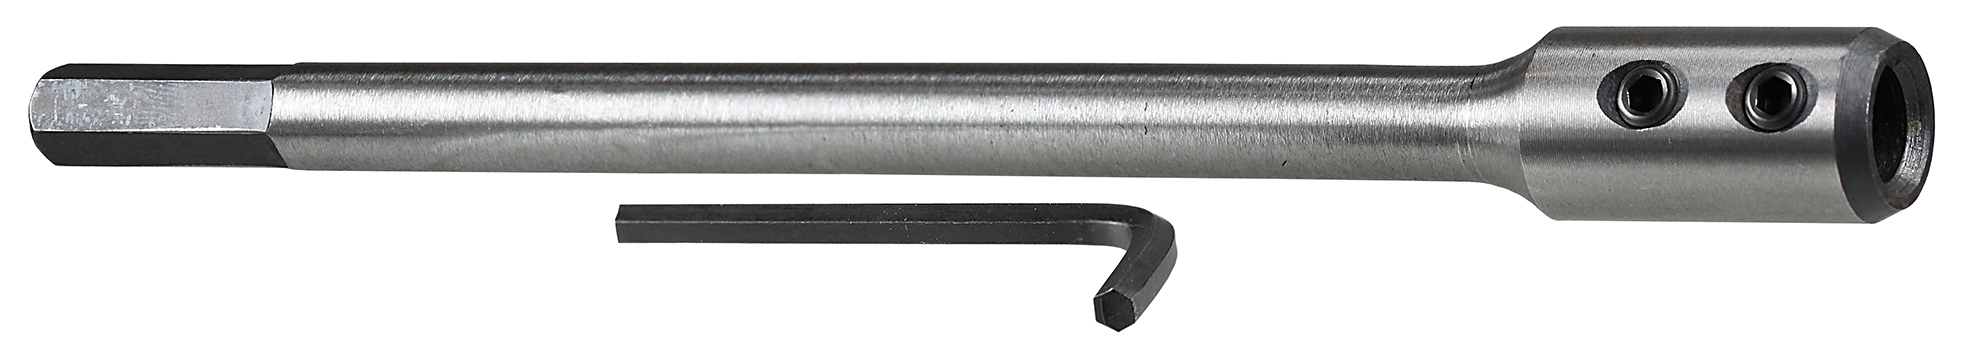 Extension, 7/16 in. Size, 5-1/2 in. length, Steel material